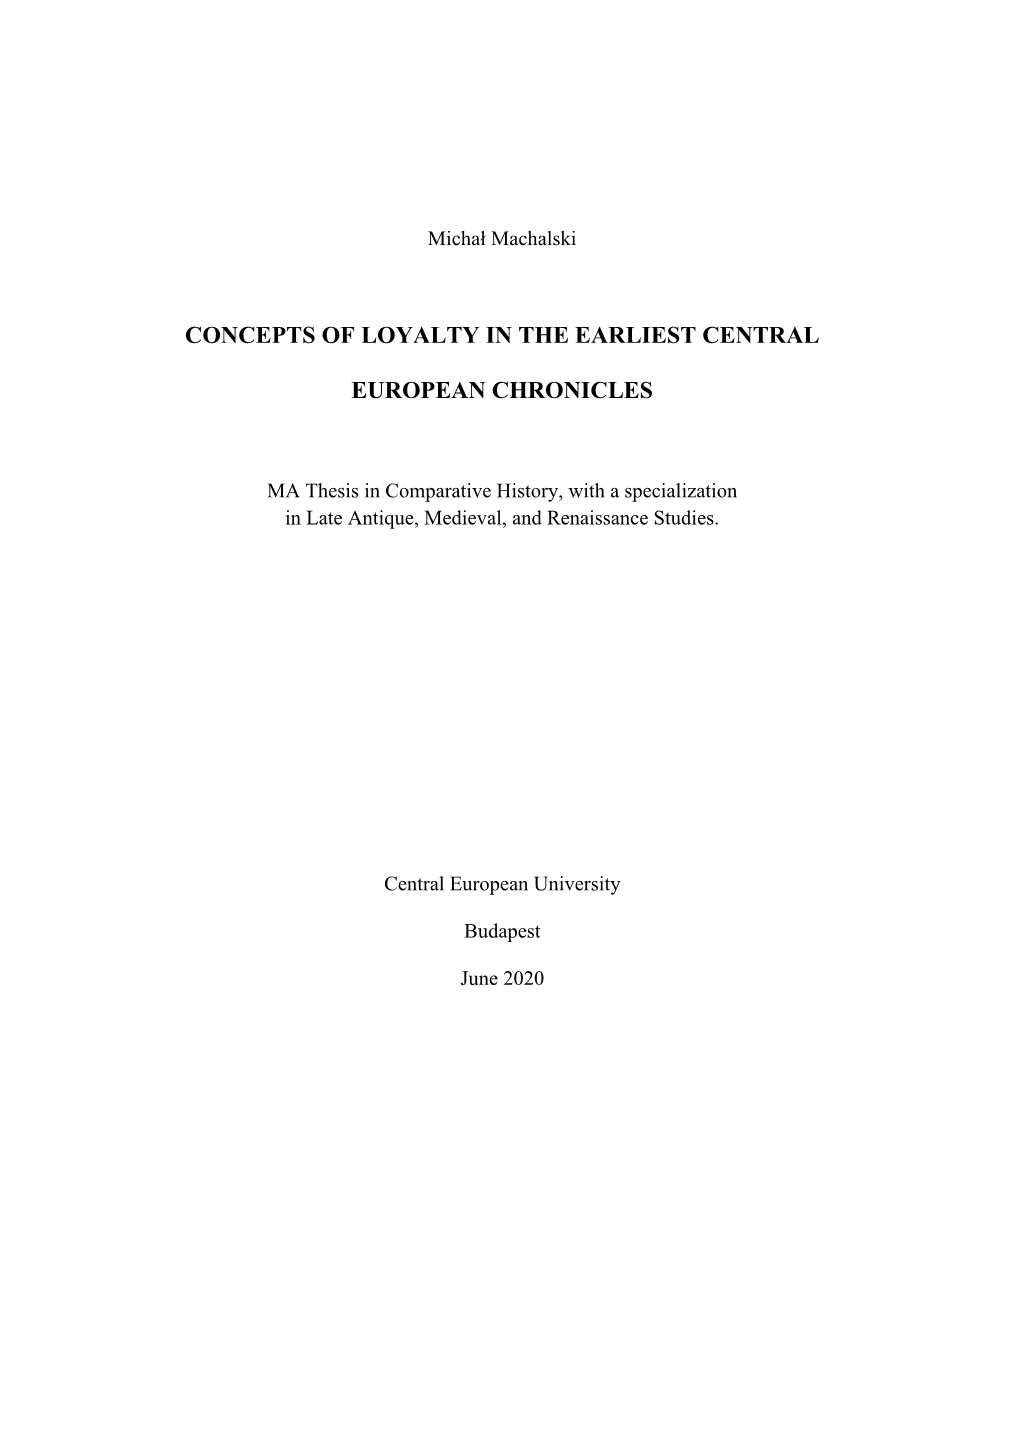 Concepts of Loyalty in the Earliest Central European Chronicles